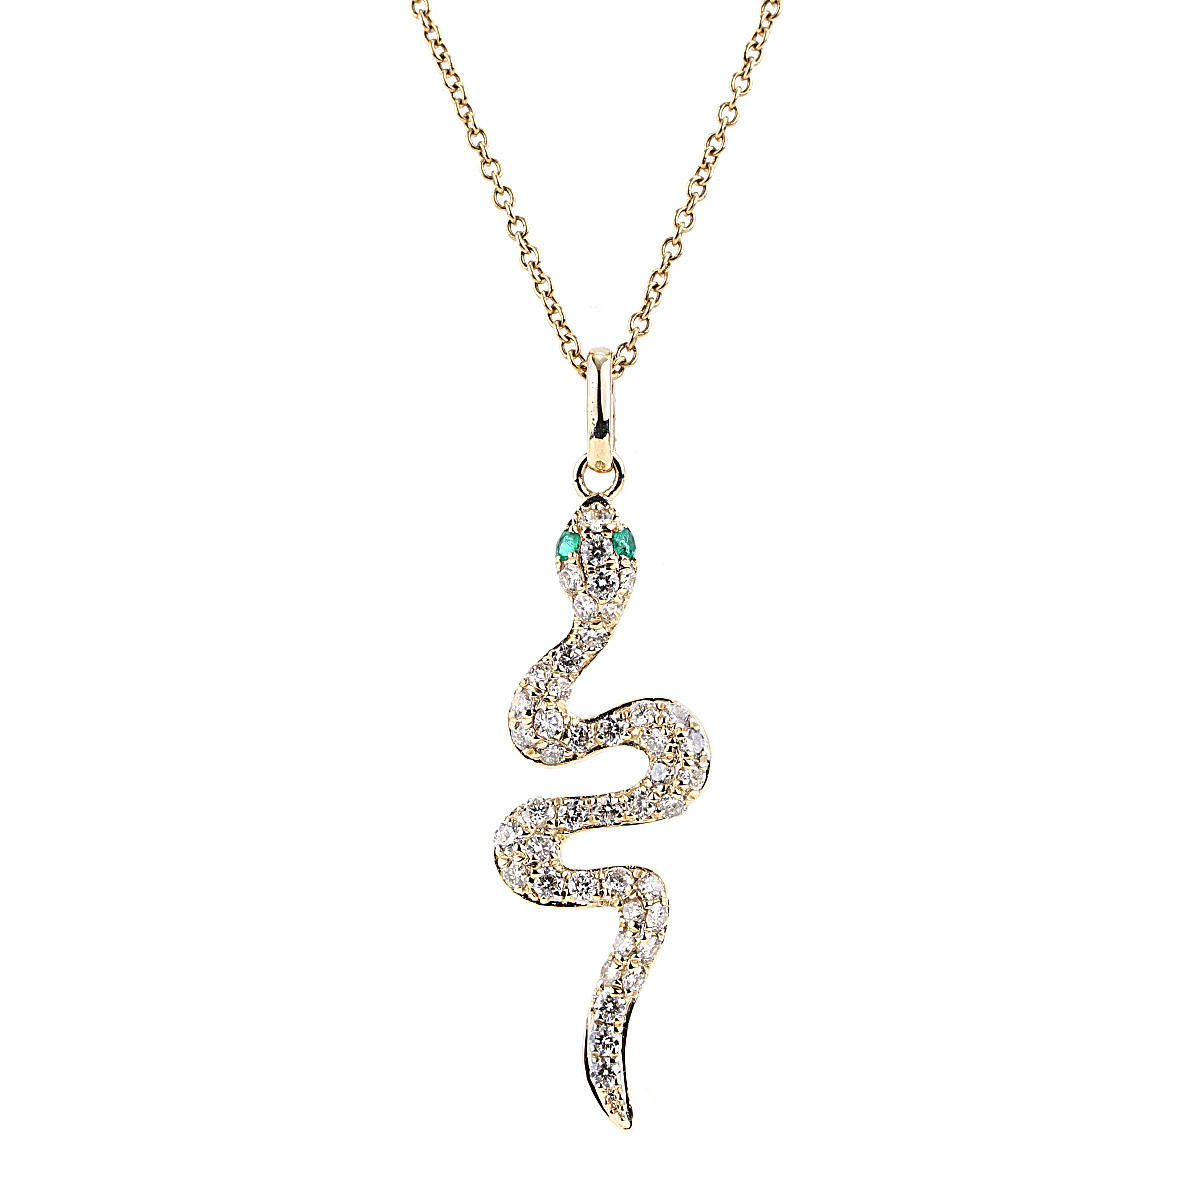 Generic Snake Necklace Two Layers @ Best Price Online | Jumia Egypt